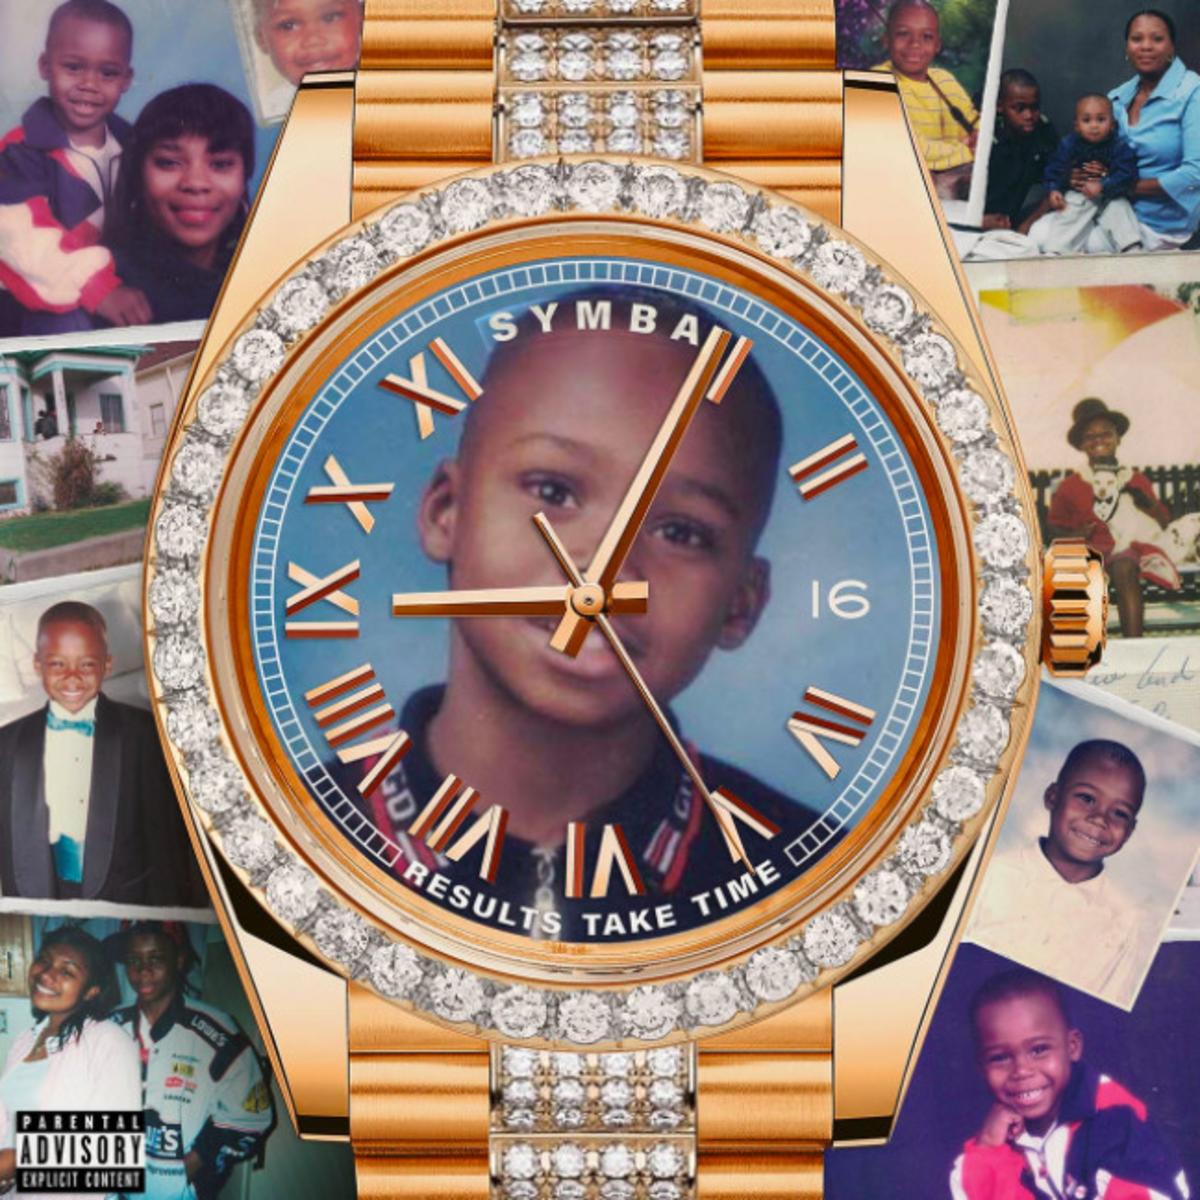 Symba Results Take Time cover artwork